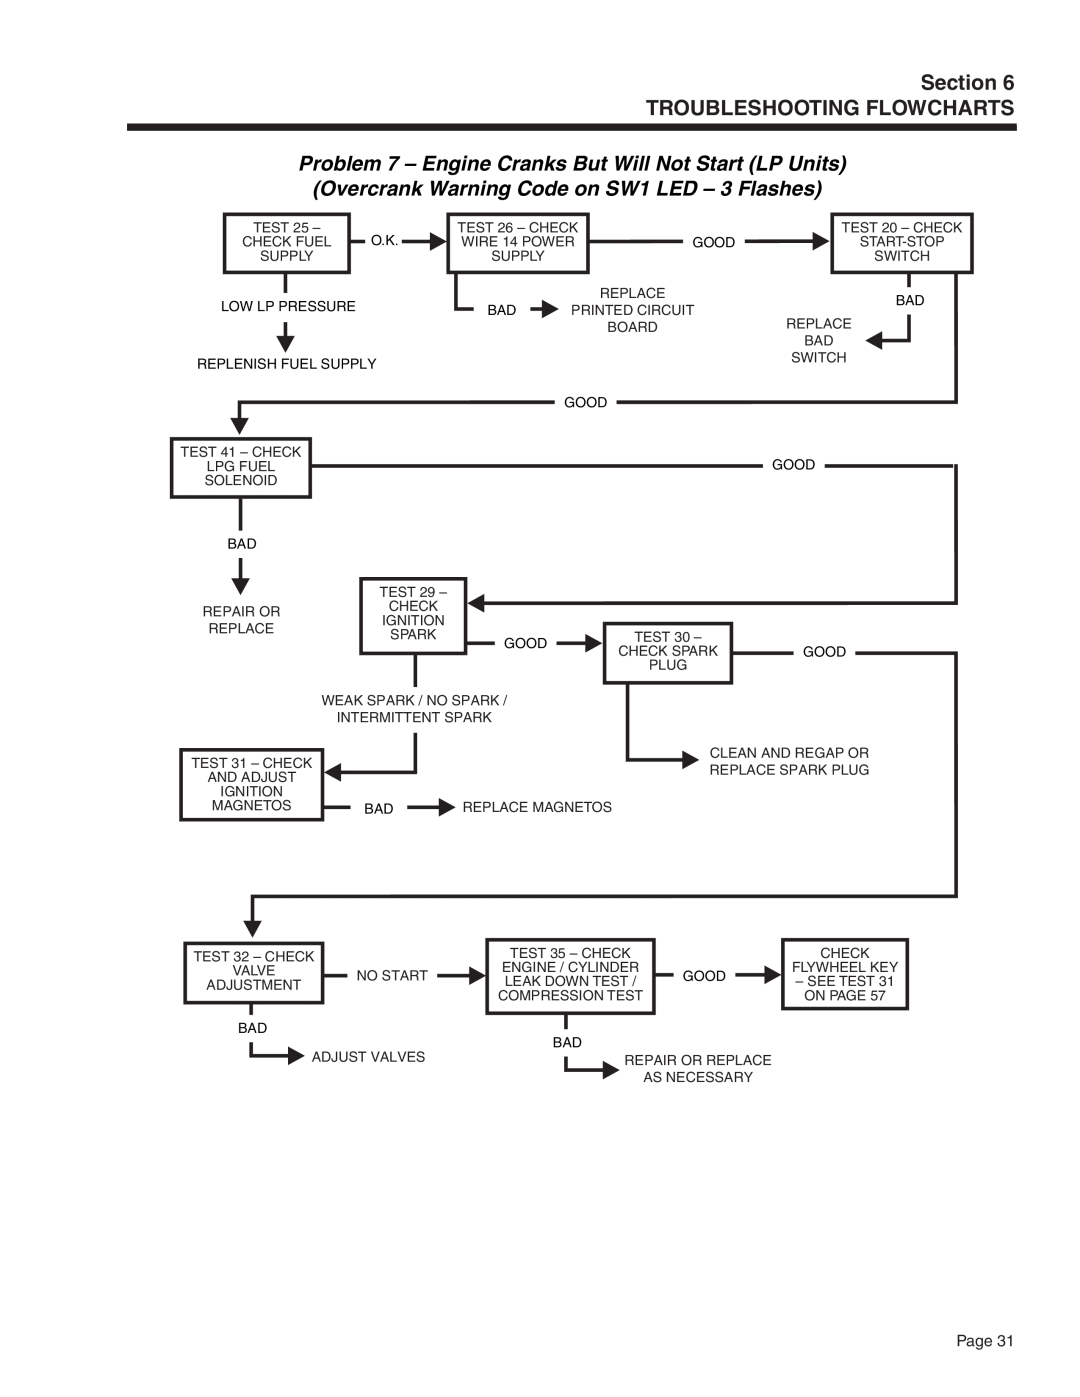 Generac Power Systems 5415, 5412, 5411, 5413, 5414, 5410 manual Section TROUBLESHOOTING FLOWCHARTS 